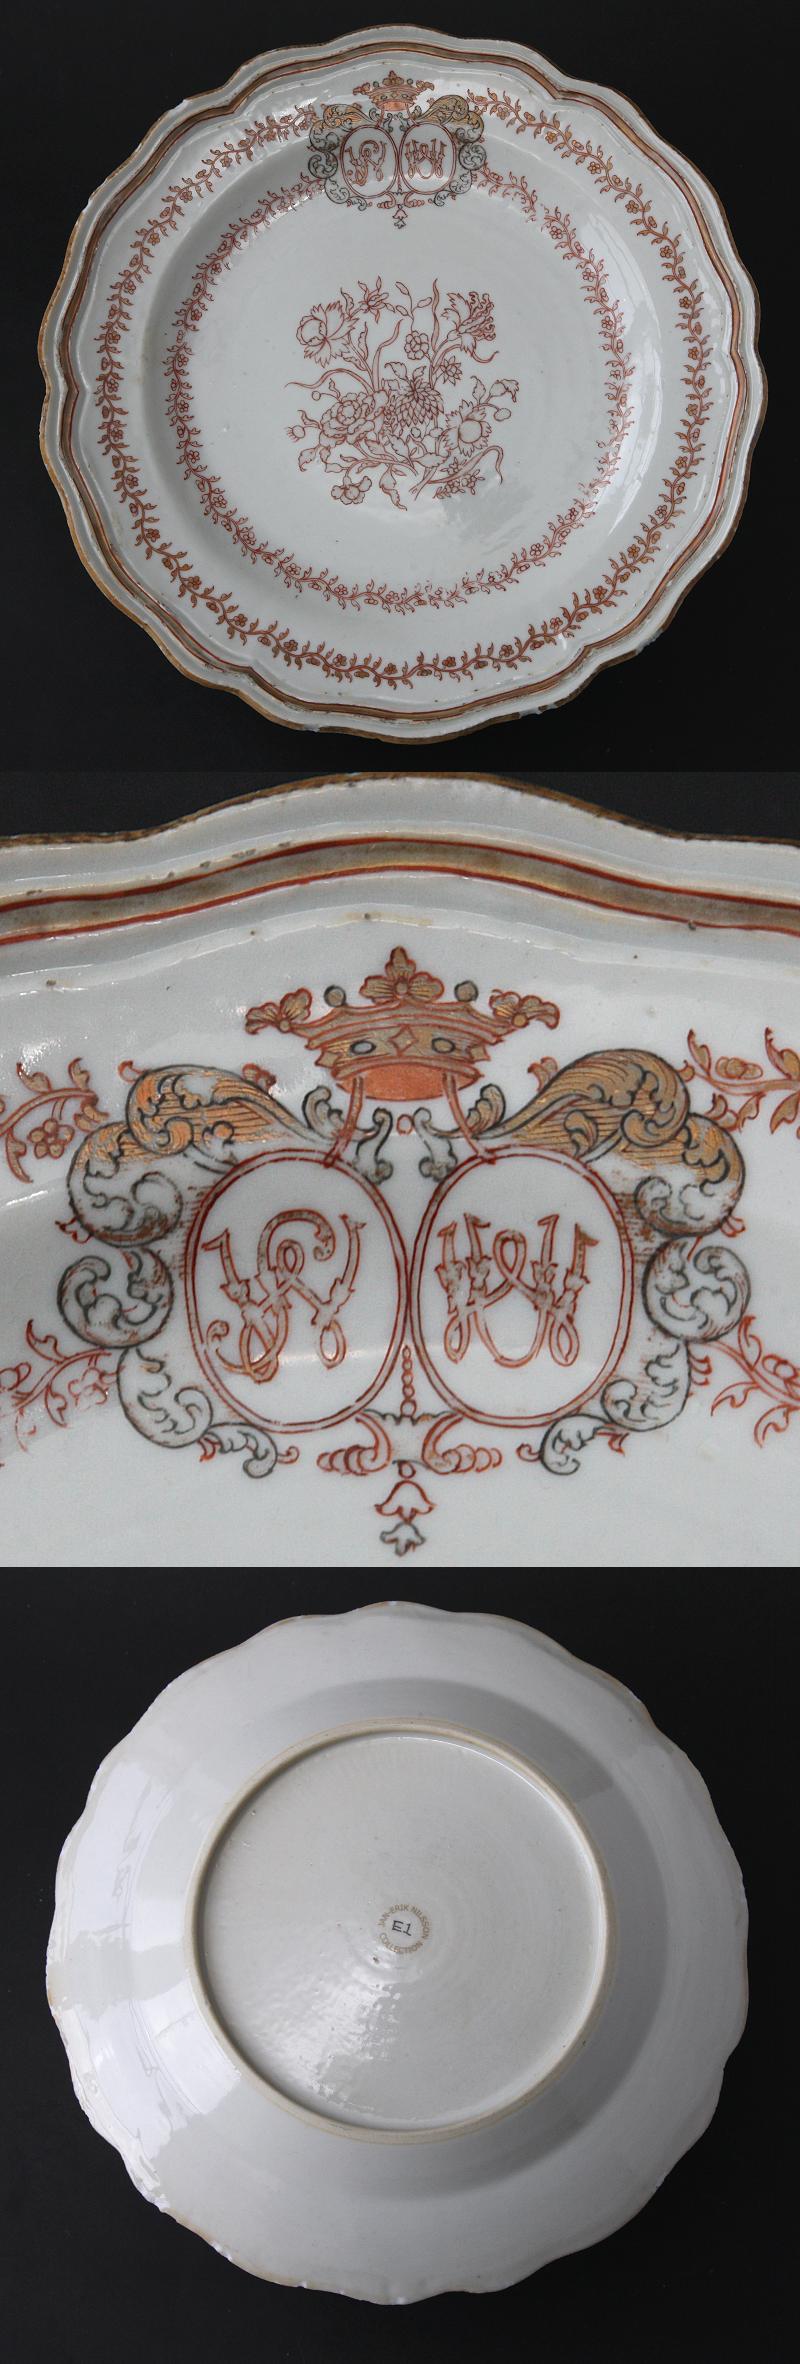 Armorial plate for
Director of SOIC
Sven N Wenngren and
Ulrica Wimnell, c.
1765